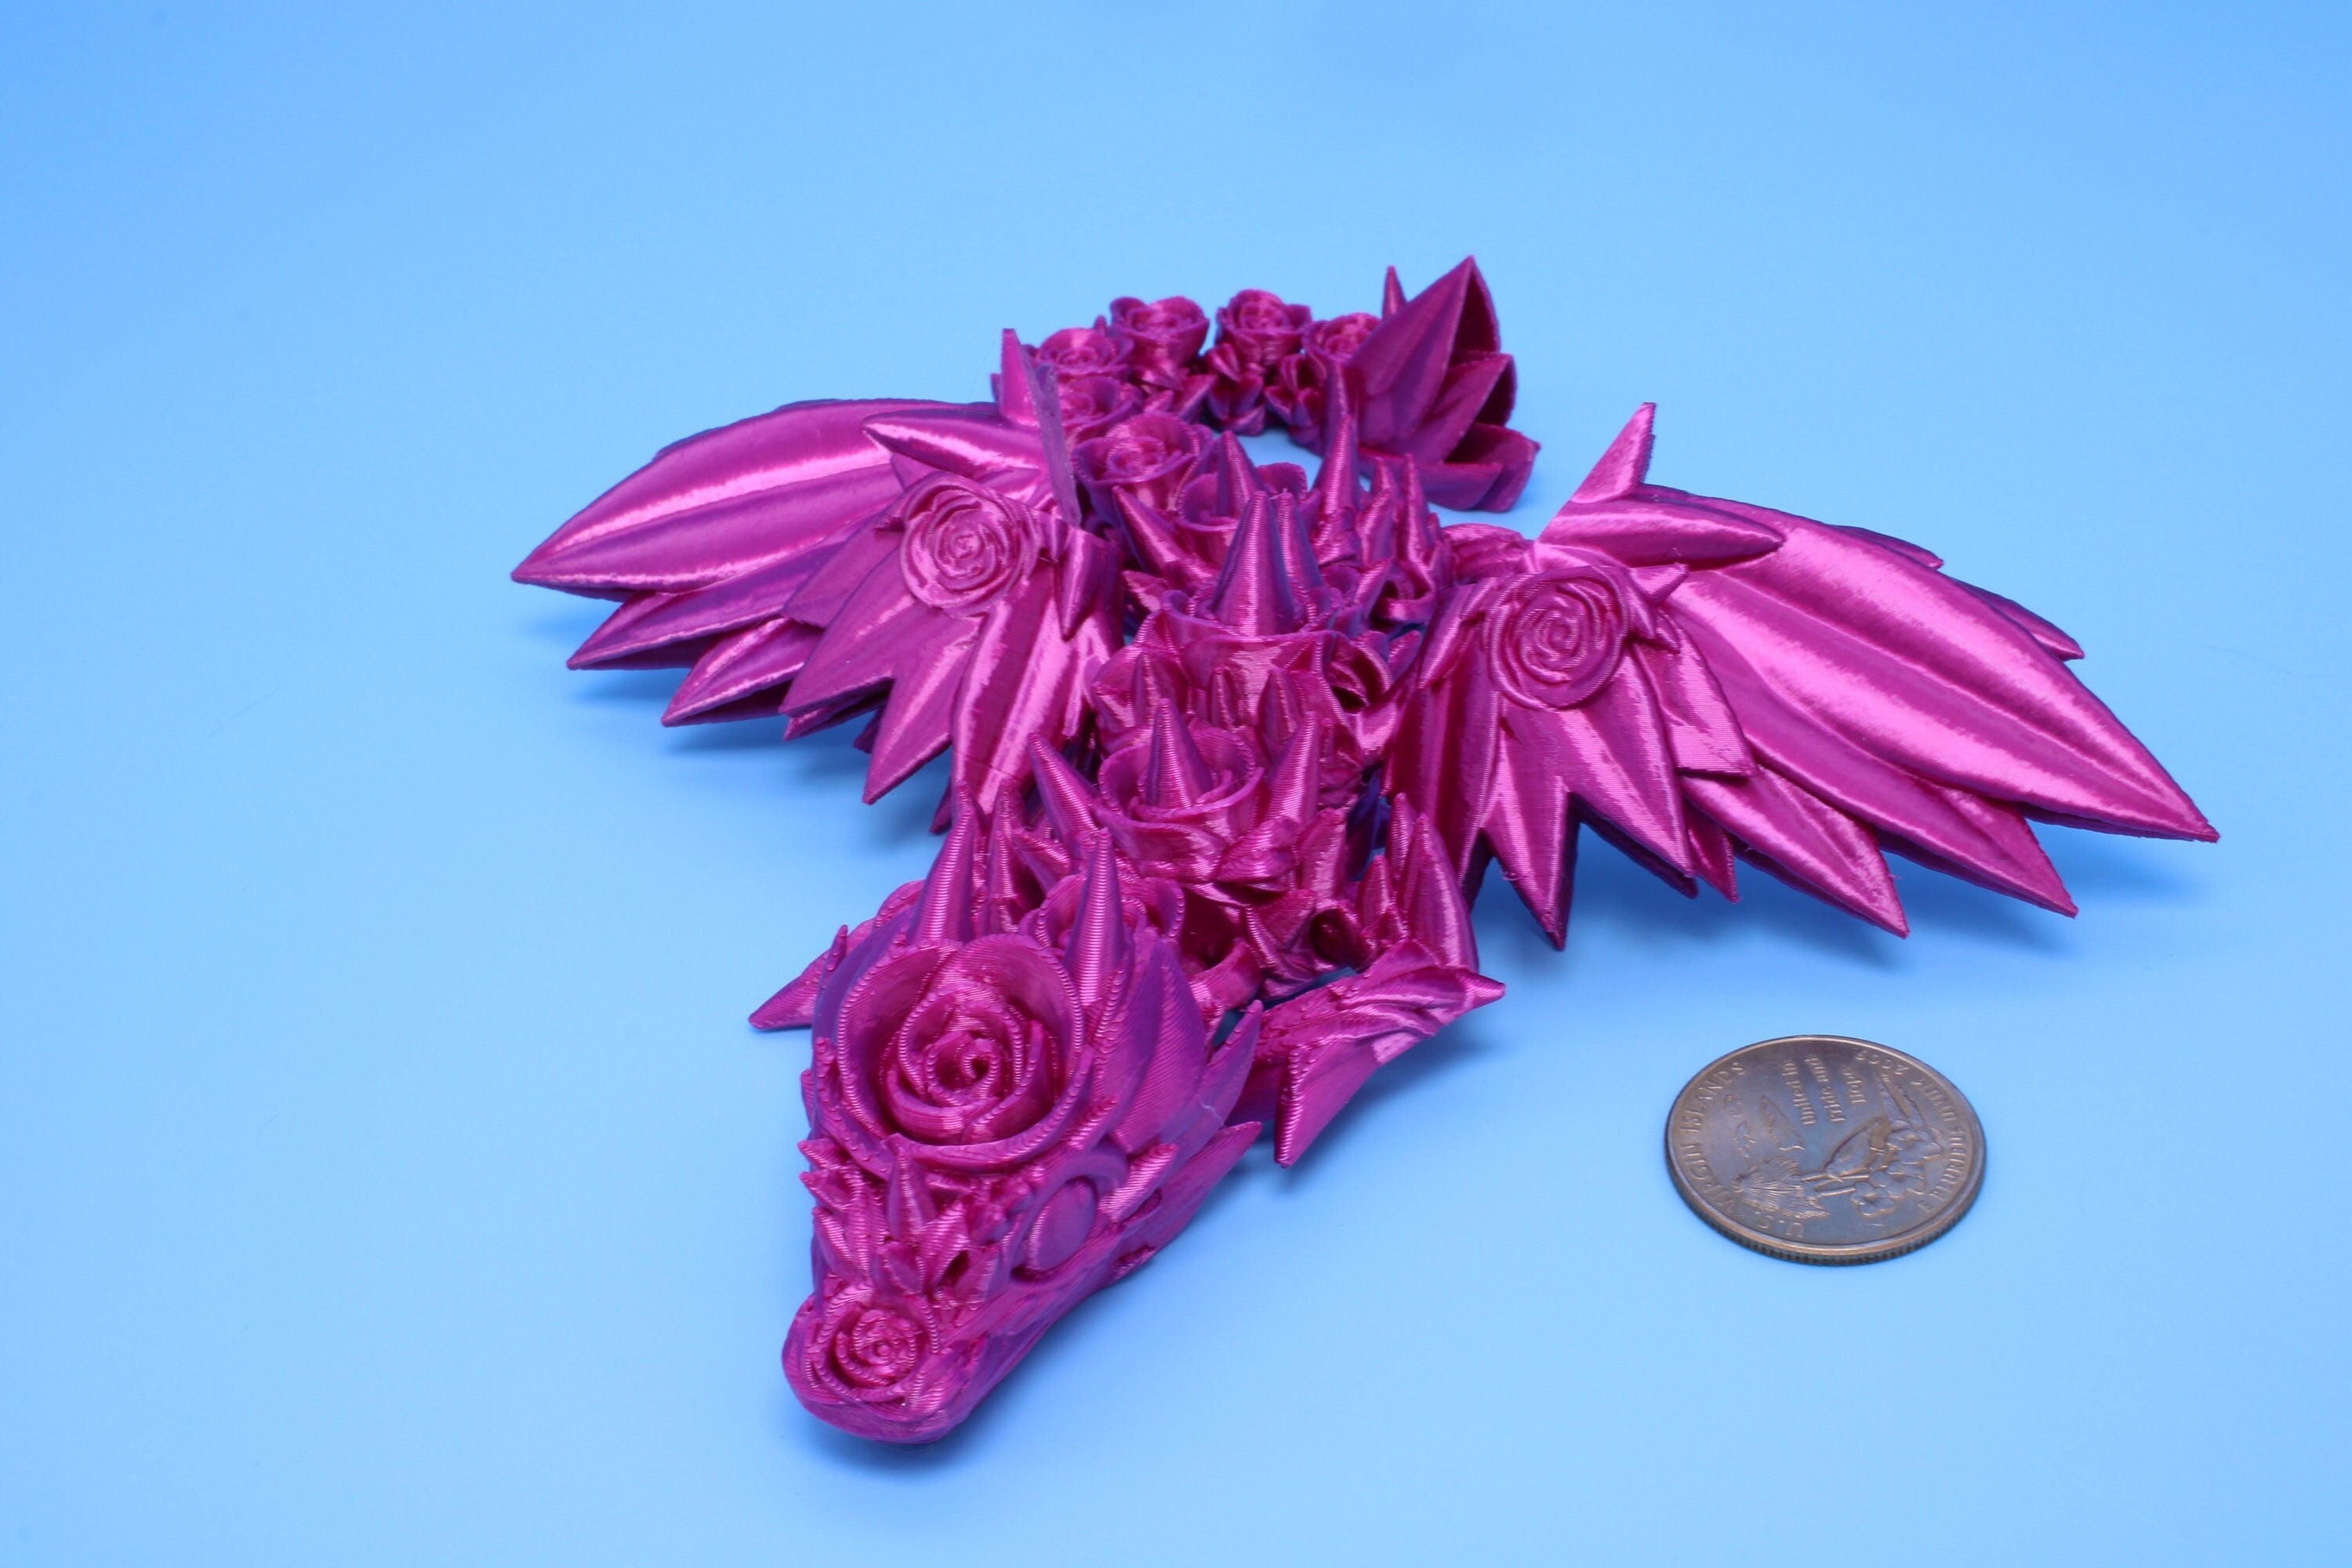 Baby Rose Wing Dragon | Pink | 3D Printed | Fidget | Flexi Toy 8.5 in. | Stress Relief Gift